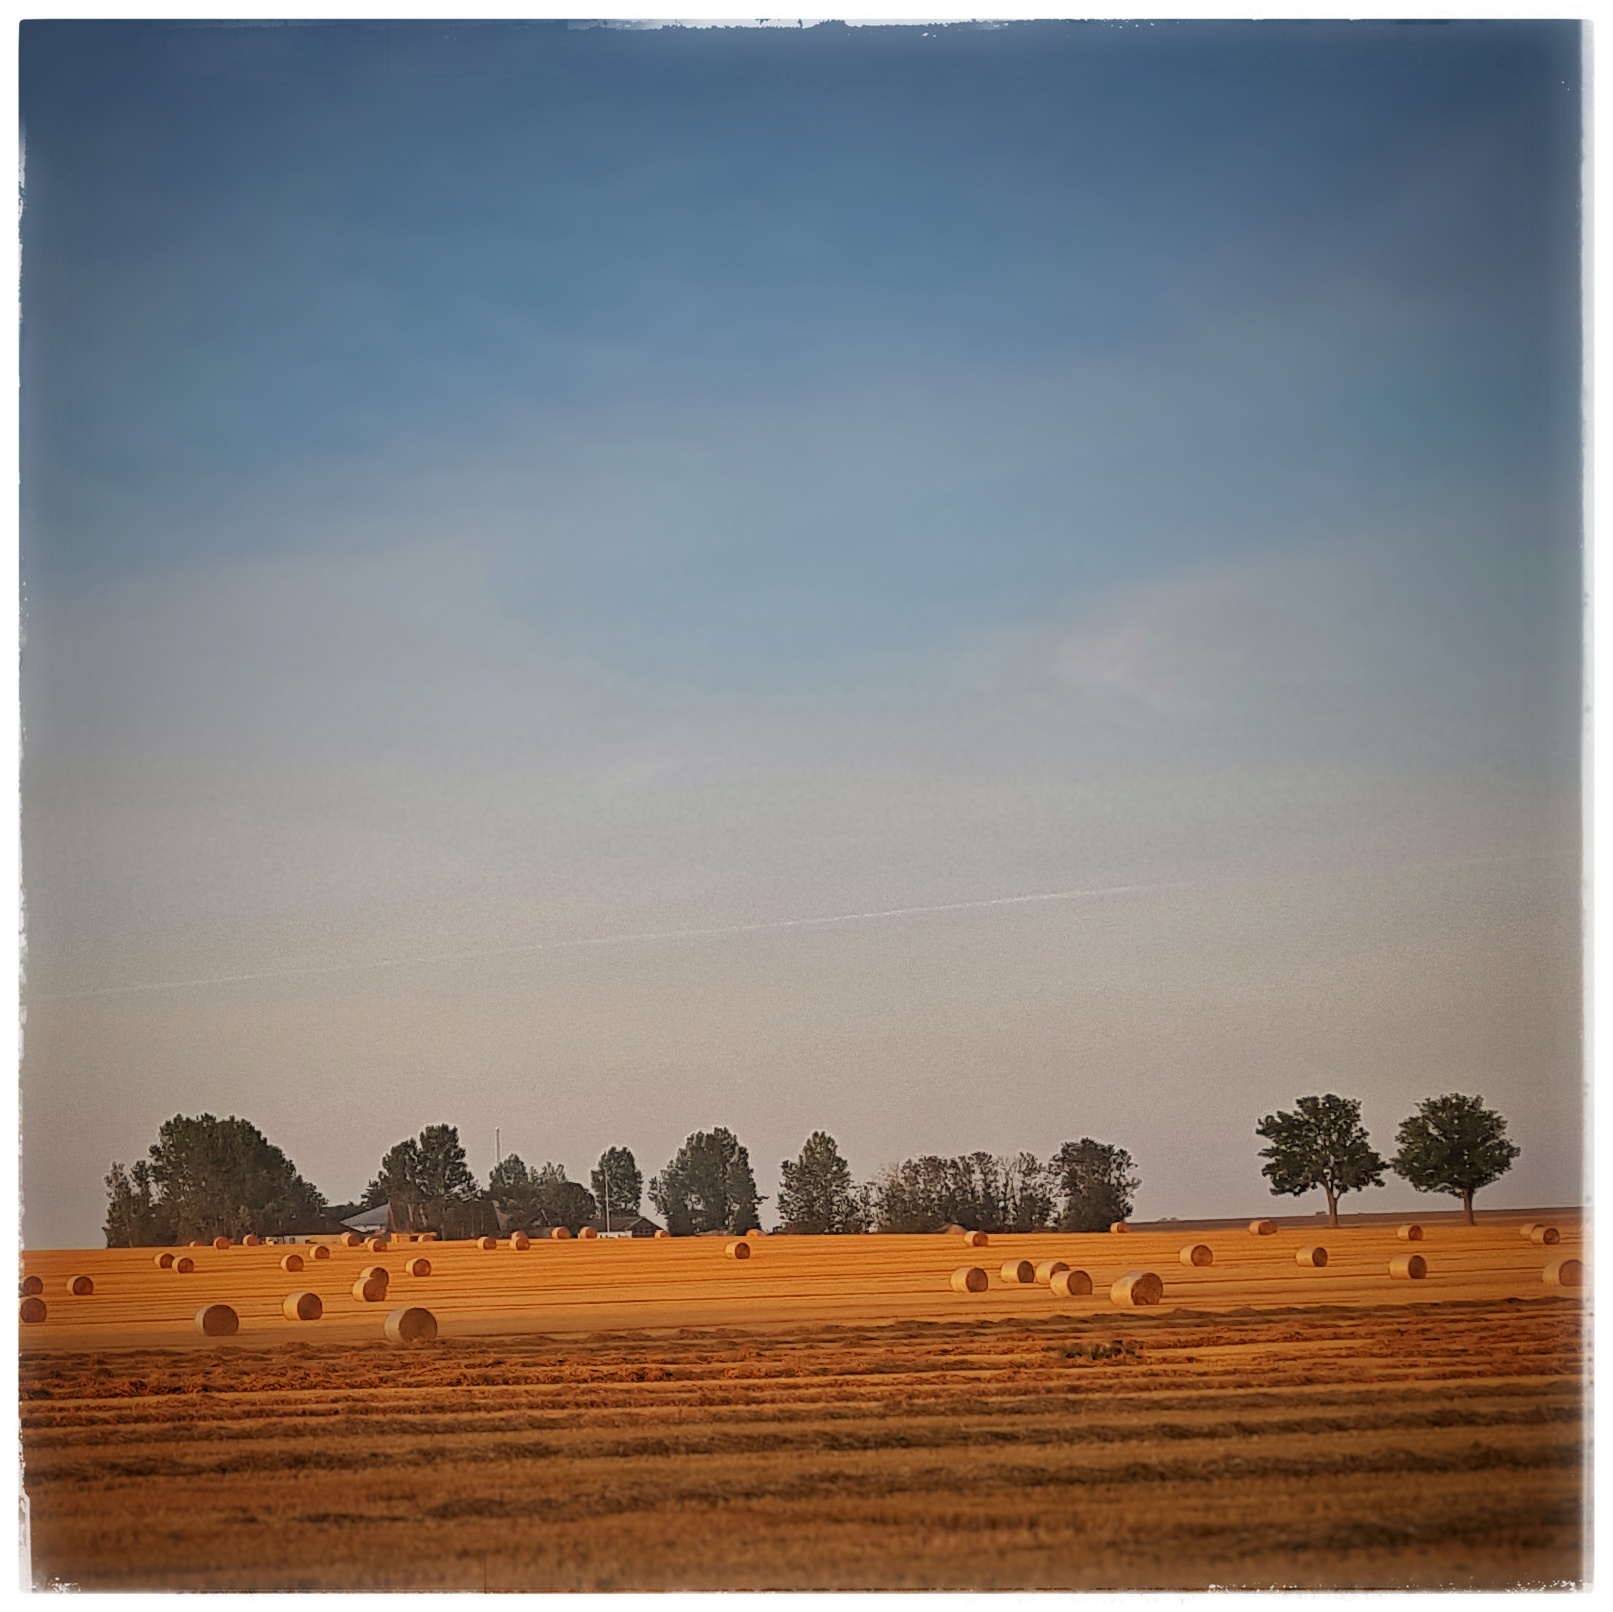 Day 234 - August 22: Out in the fields